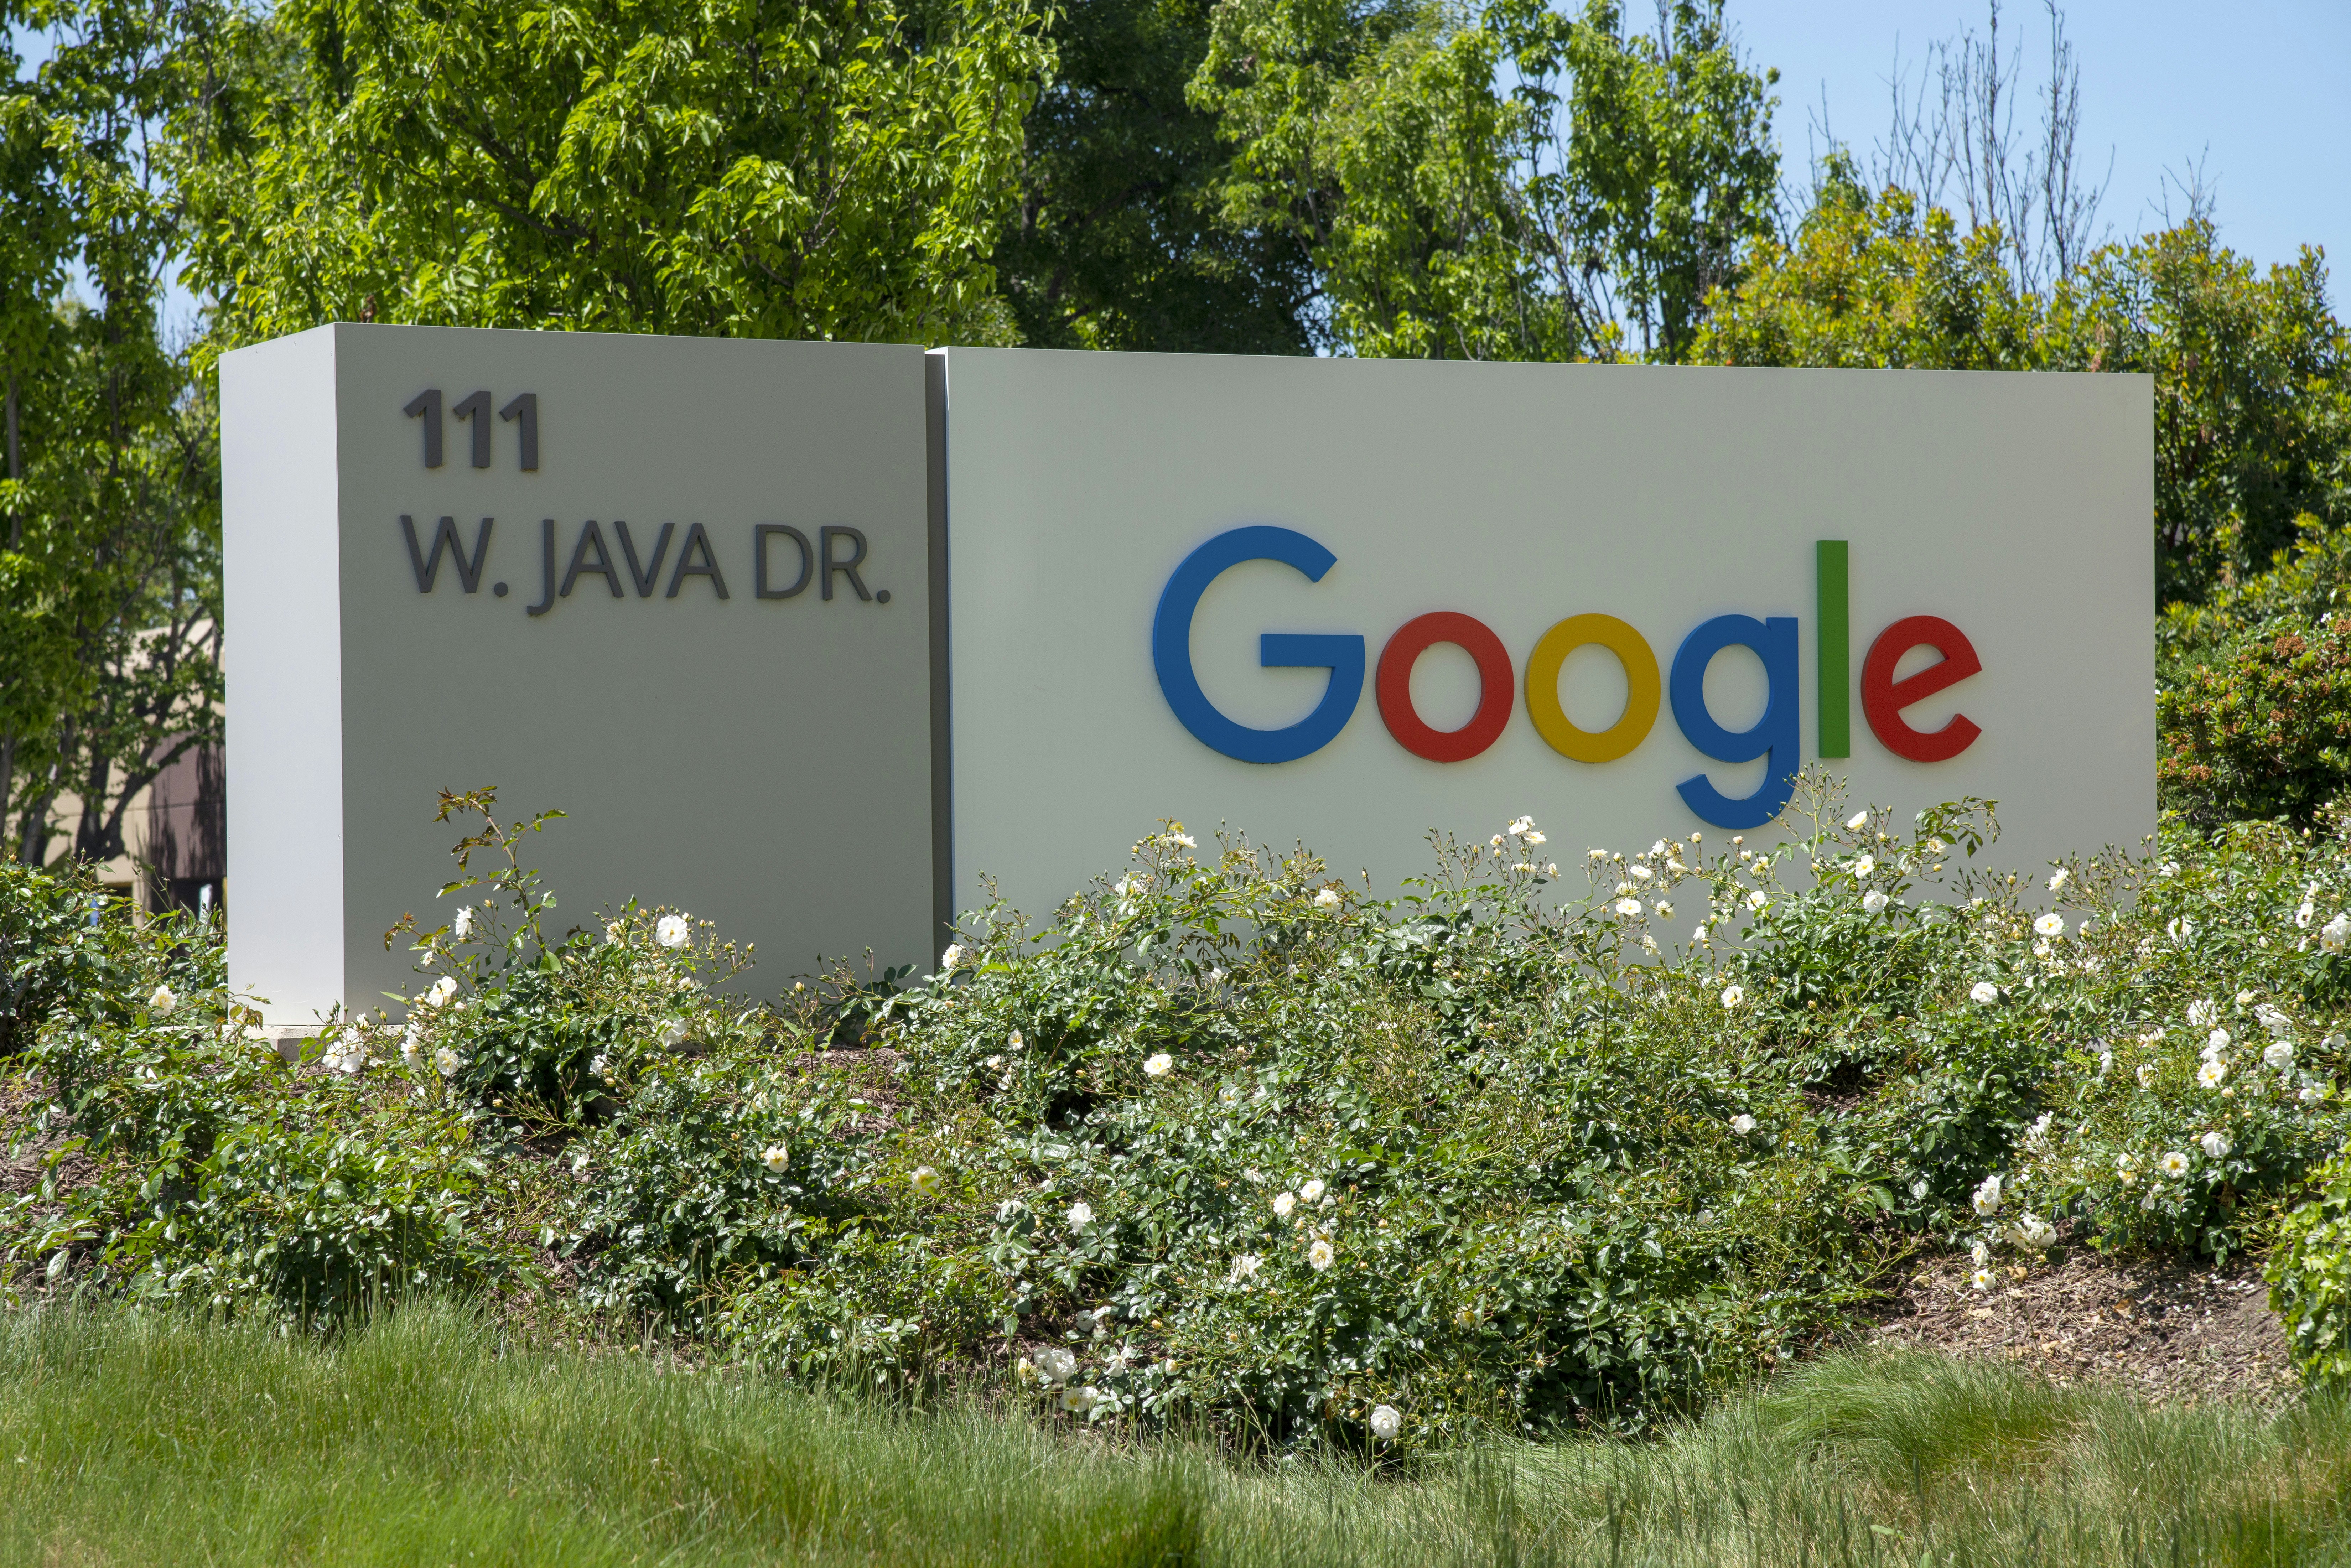 Google in Sunnyvale, CA, at West Java Drive.